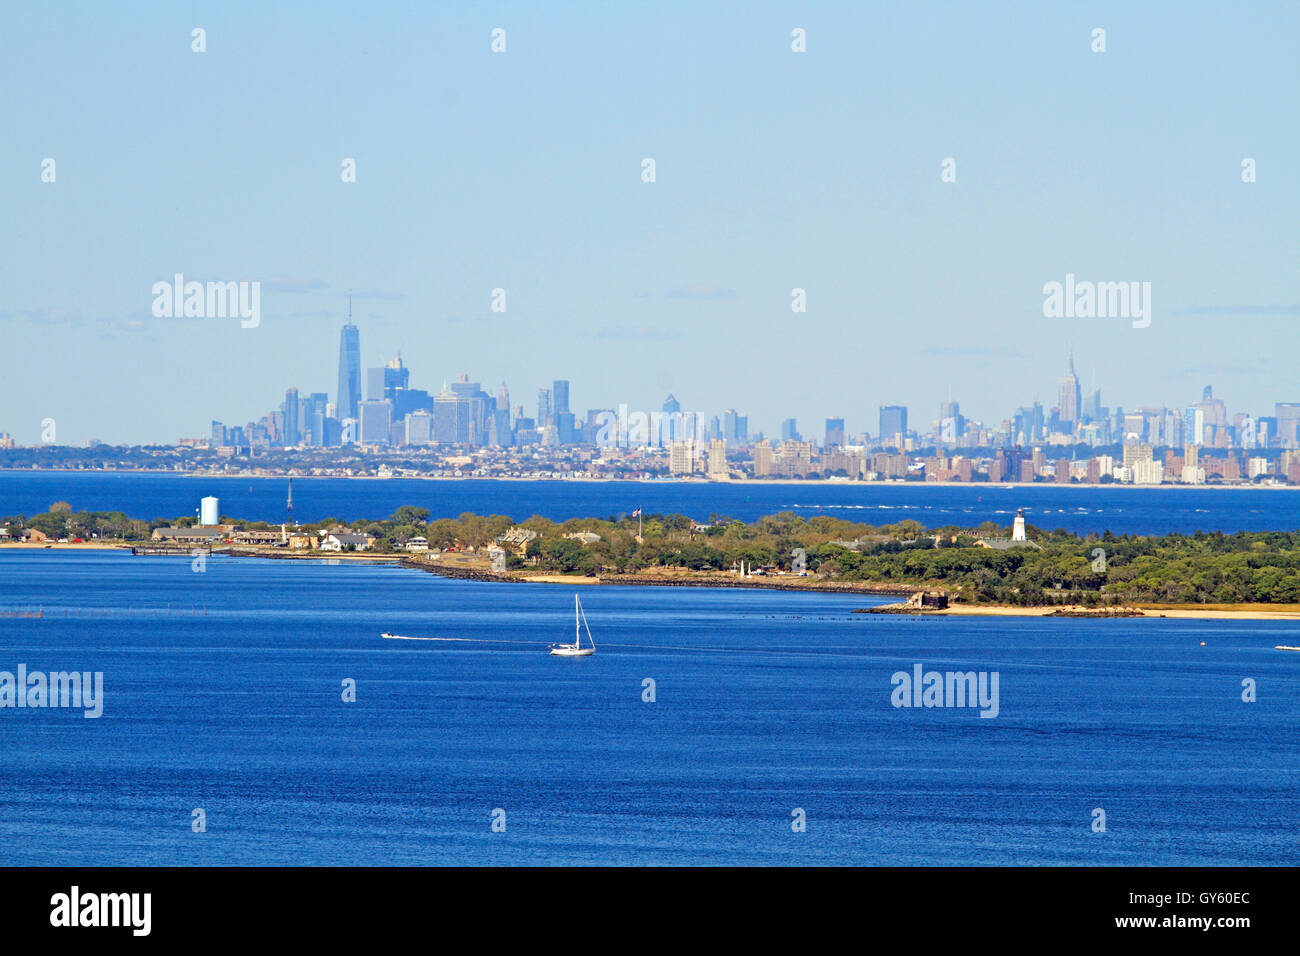 A view of Sandy Hook Bay and Lower Manhattan from Mount Mitchell, Atlantic Highlands, New Jersey, USA Stock Photo